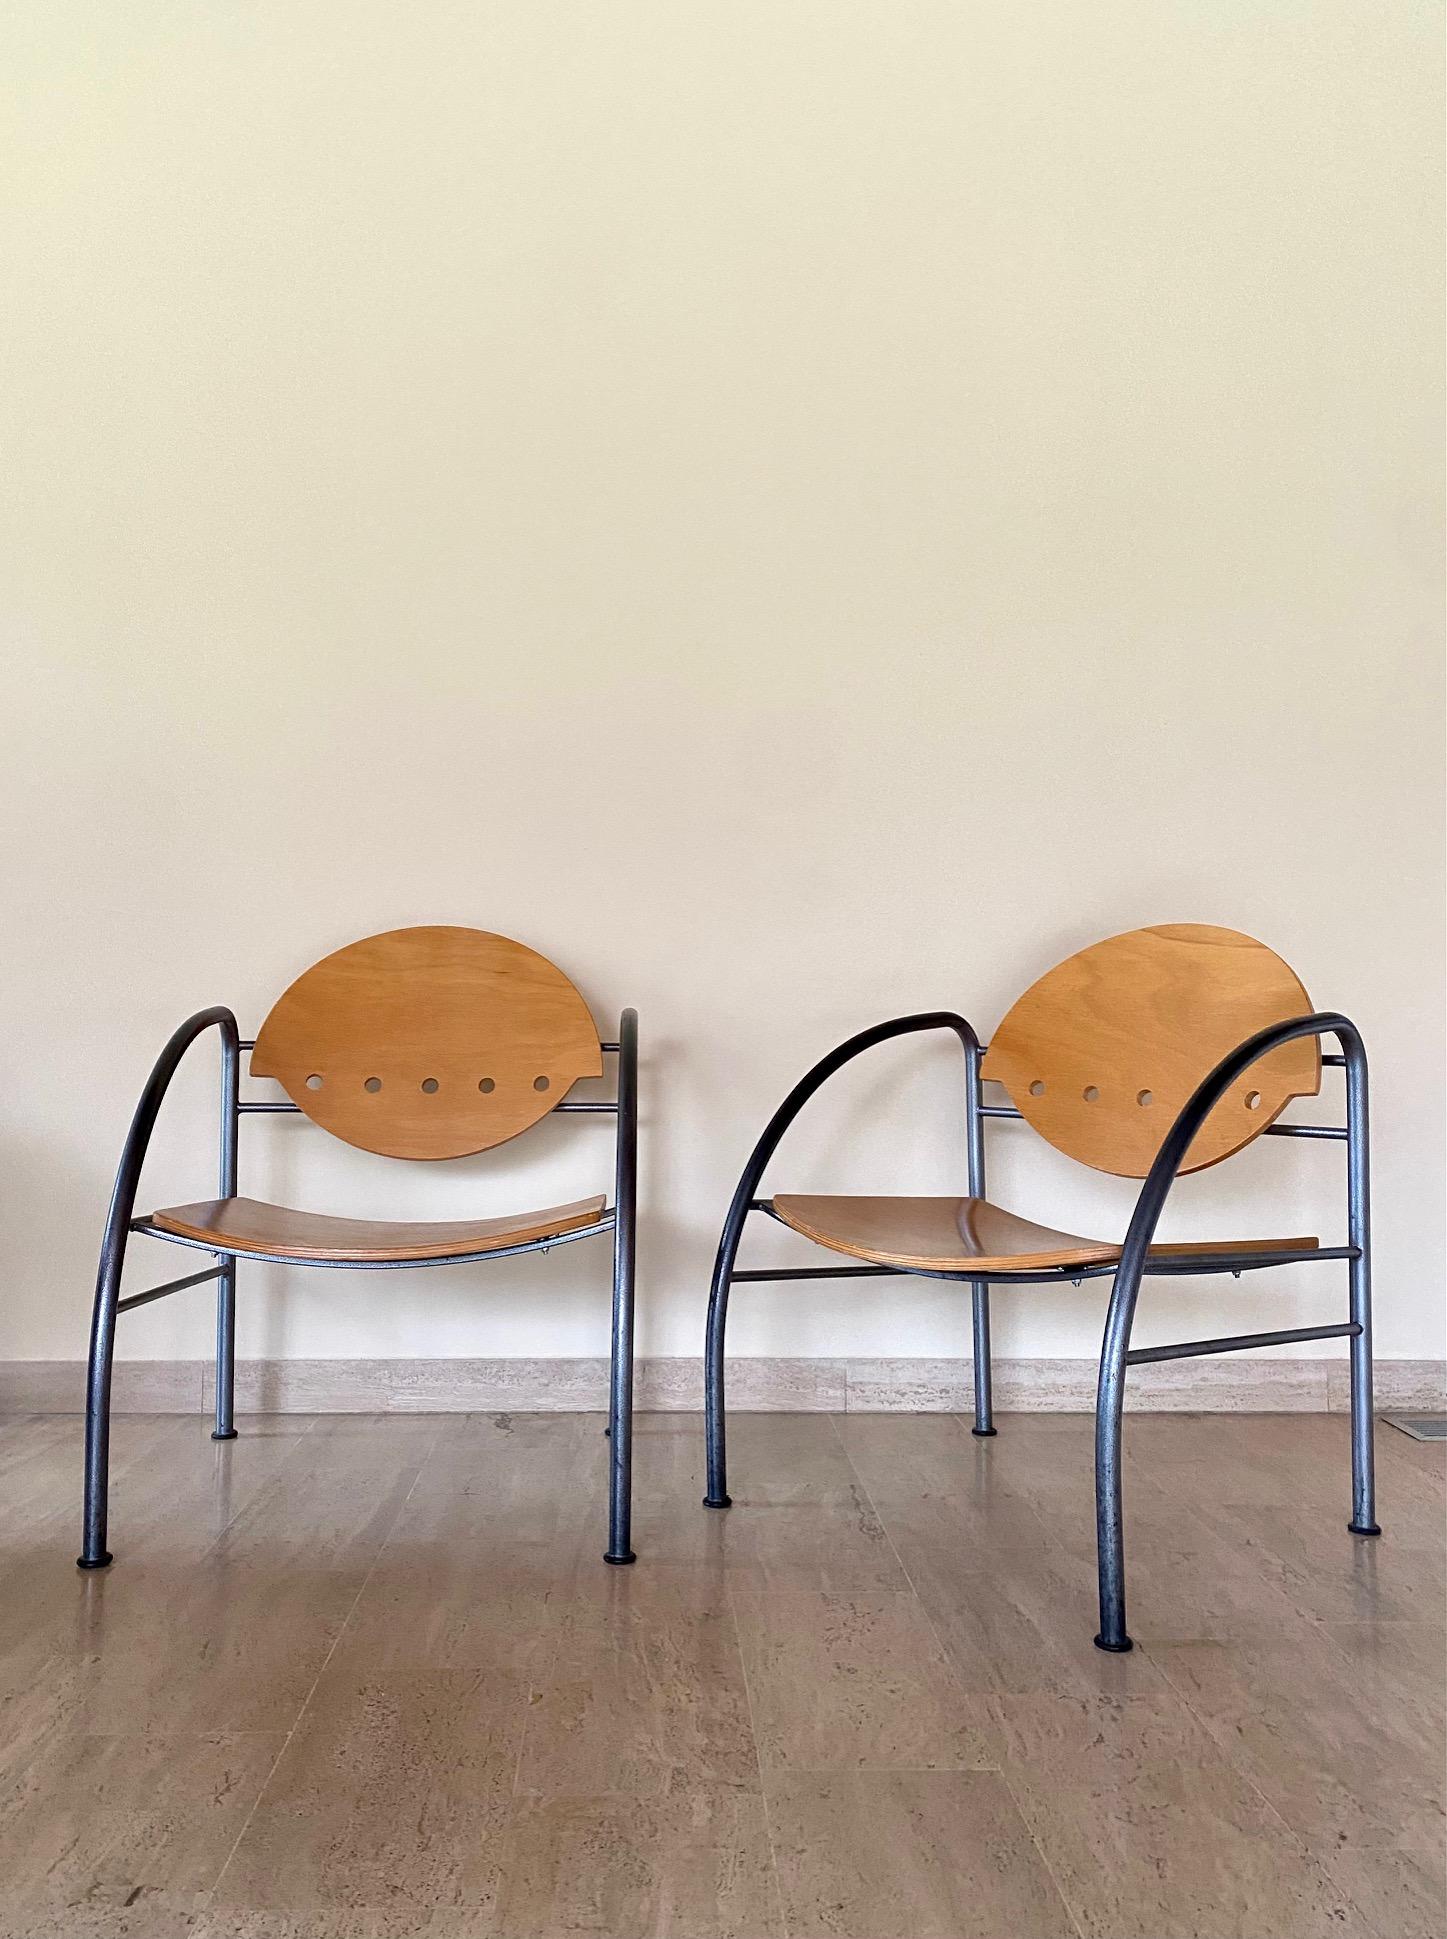 Pair of stylish postmodern armchairs in steel and wood.

Italian work from the oeghties.